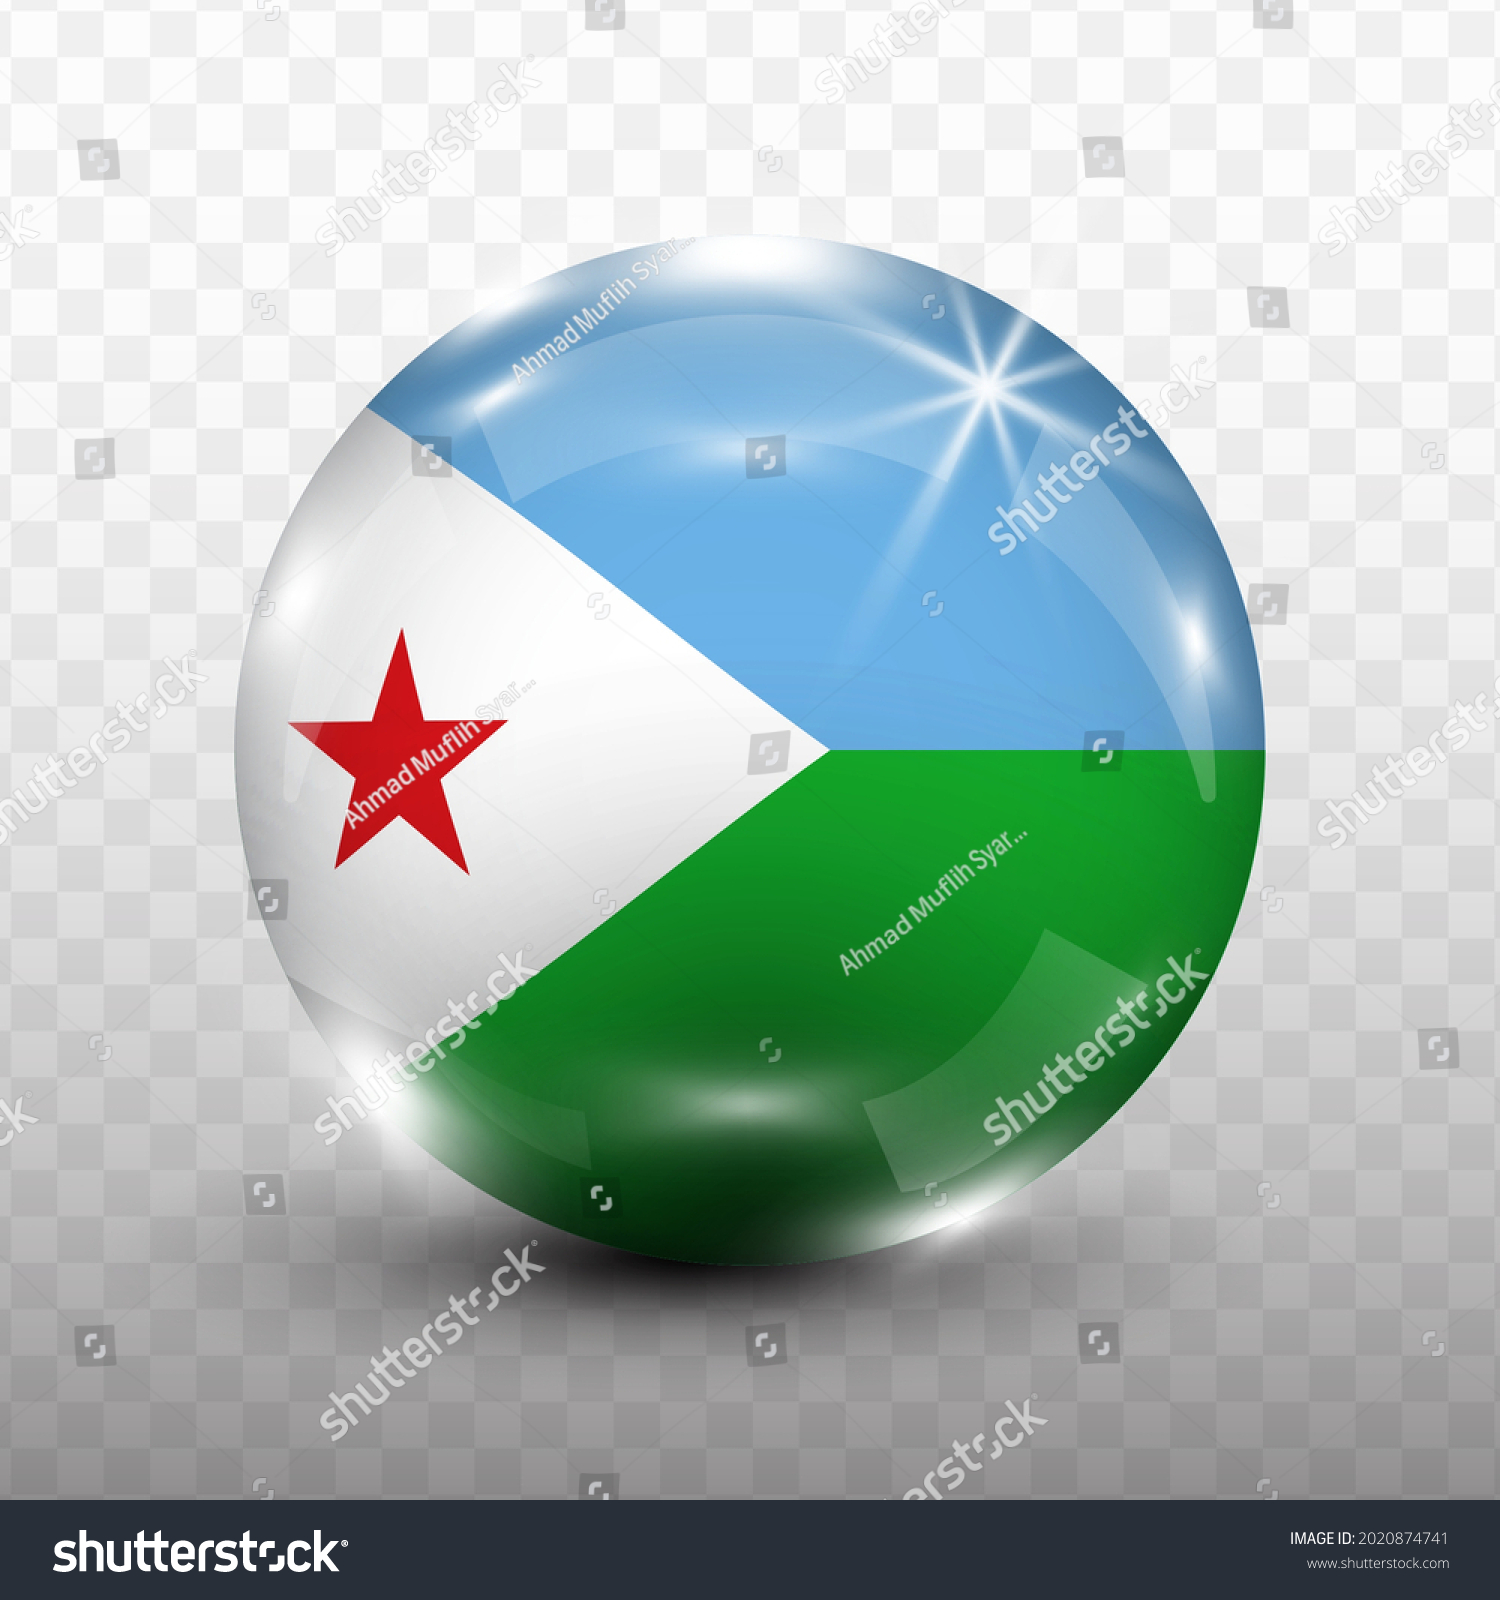 SVG of Glass Ball Flag of Djibouti with transparent background(PNG), Vector Illustration. svg